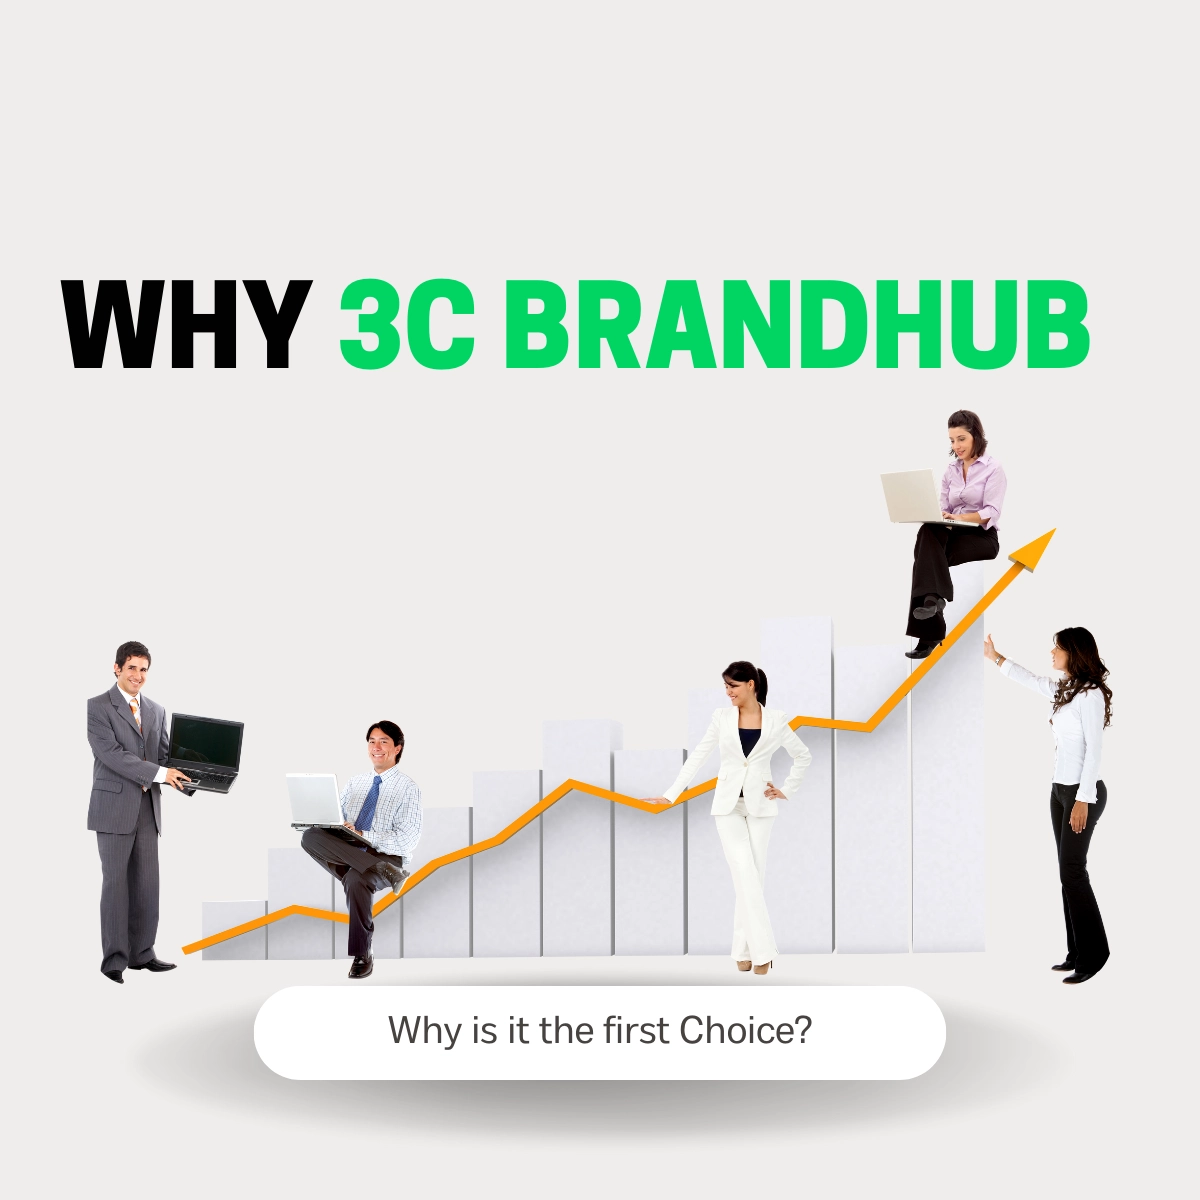 why 3C brandhub is first choice in branding